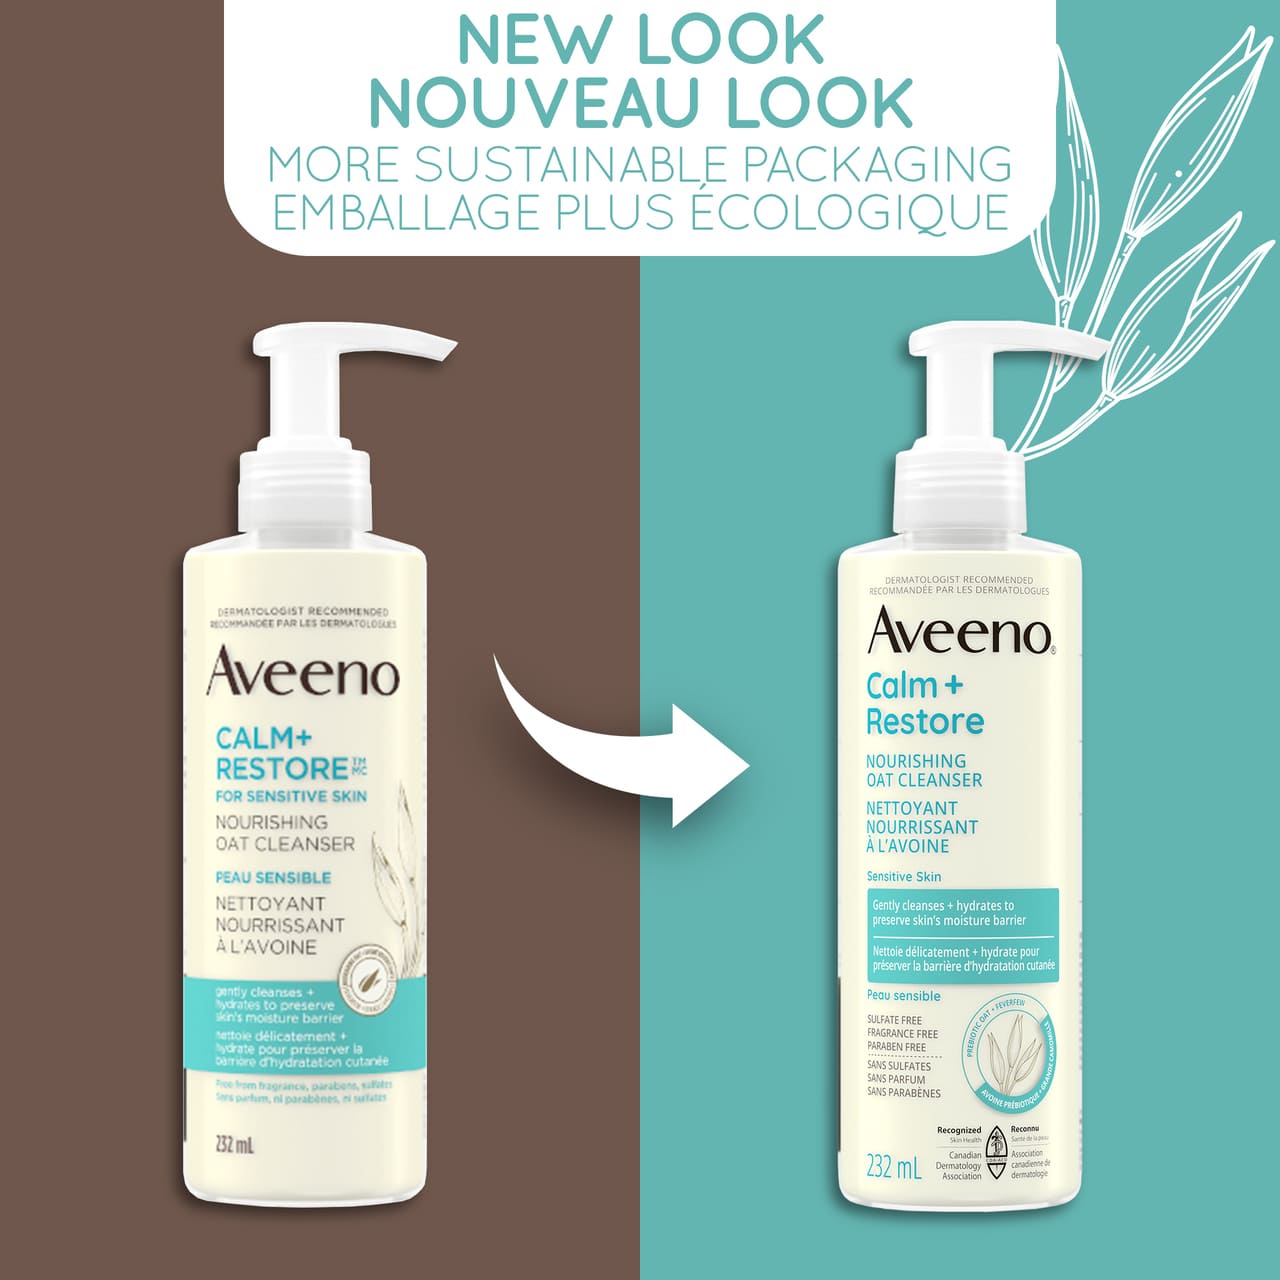 Old and new packaging of AVEENO® Calm + Restore Nourishing Oat Cleanser, 232mL pump bottle, with text 'new look'